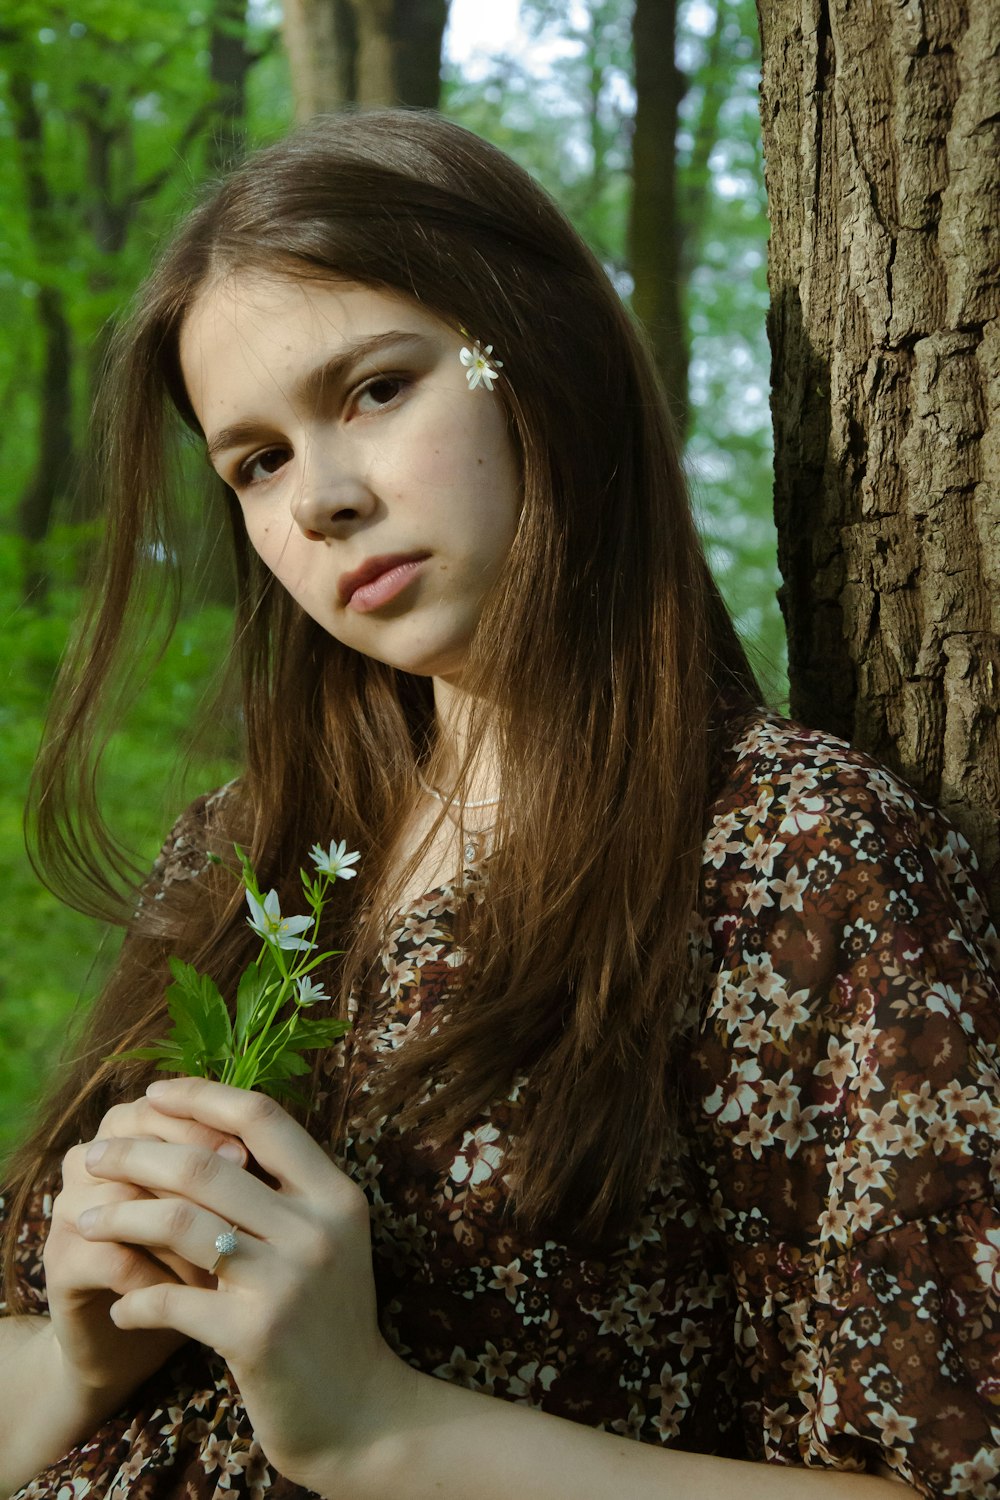 a girl in a dress holding a flower in front of a tree